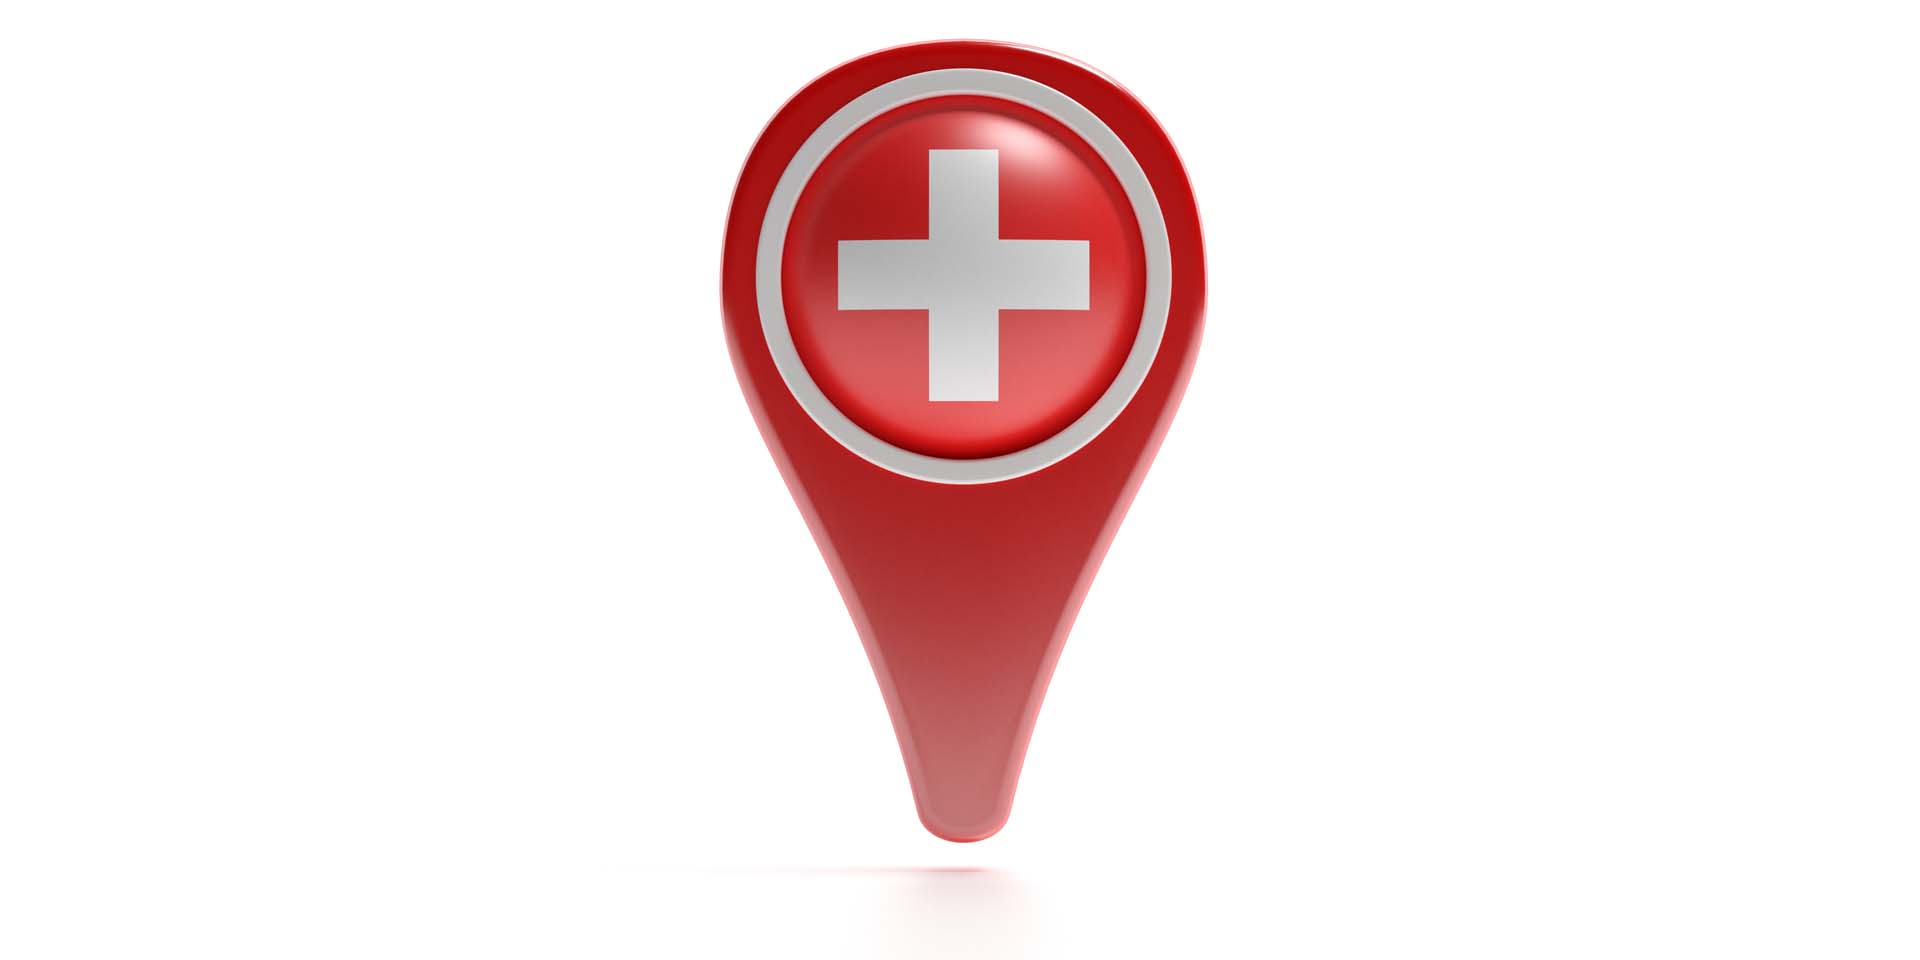 Medical care location concept. Cross plus icon on a red color map pointer isolated against white background. 3d illustration